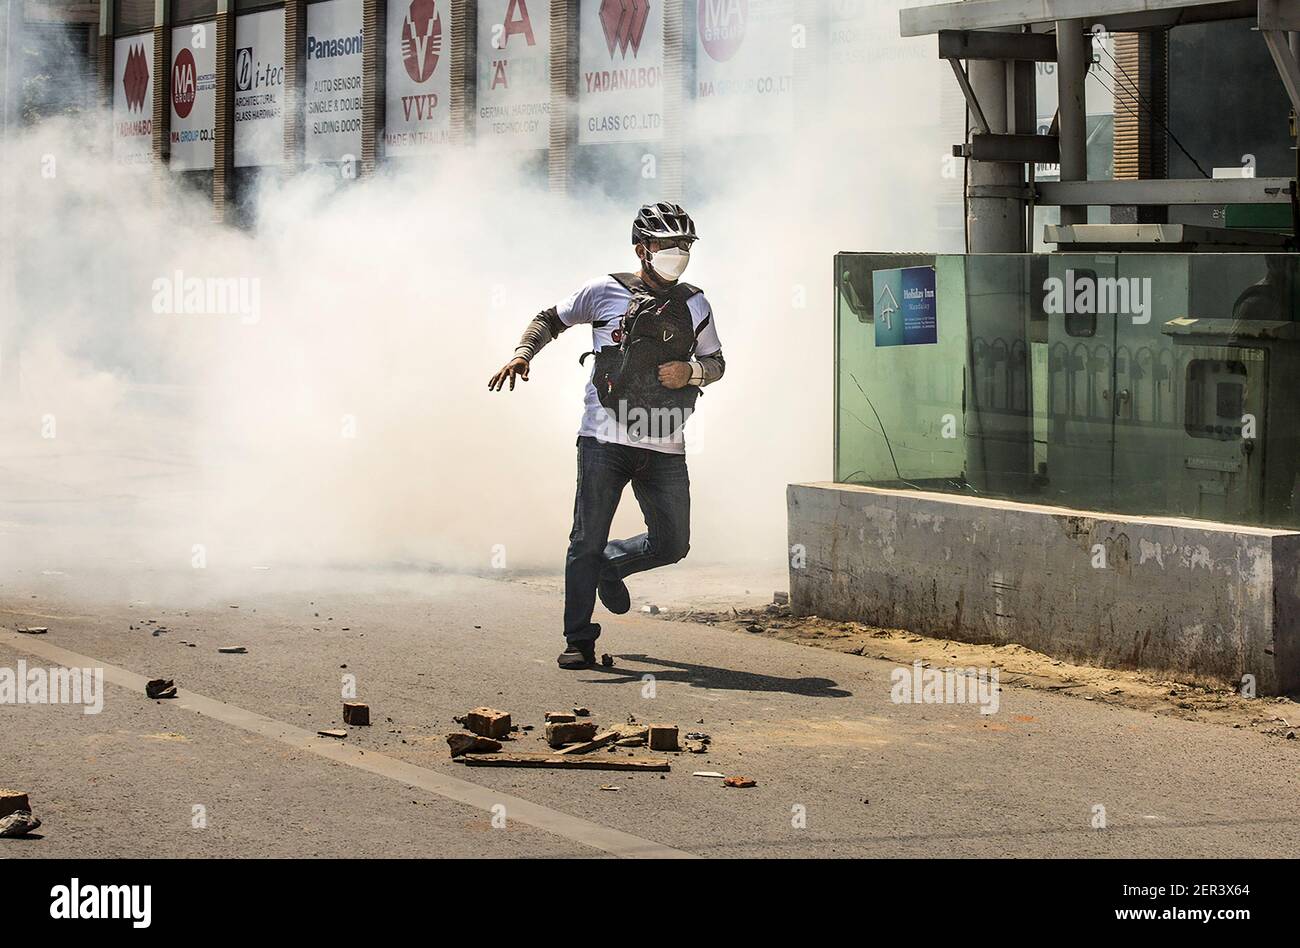 Mandalay, Myanmar. 28th Feb, 2021. A protester runs as police fire tear gas during a protest against the military coup in Mandalay, Myanmar, Sunday, February. 28, 2021. Security forces continue to crackdown on demonstrations against the military coup. Photo by Xiao Long/UPI Credit: UPI/Alamy Live News Stock Photo